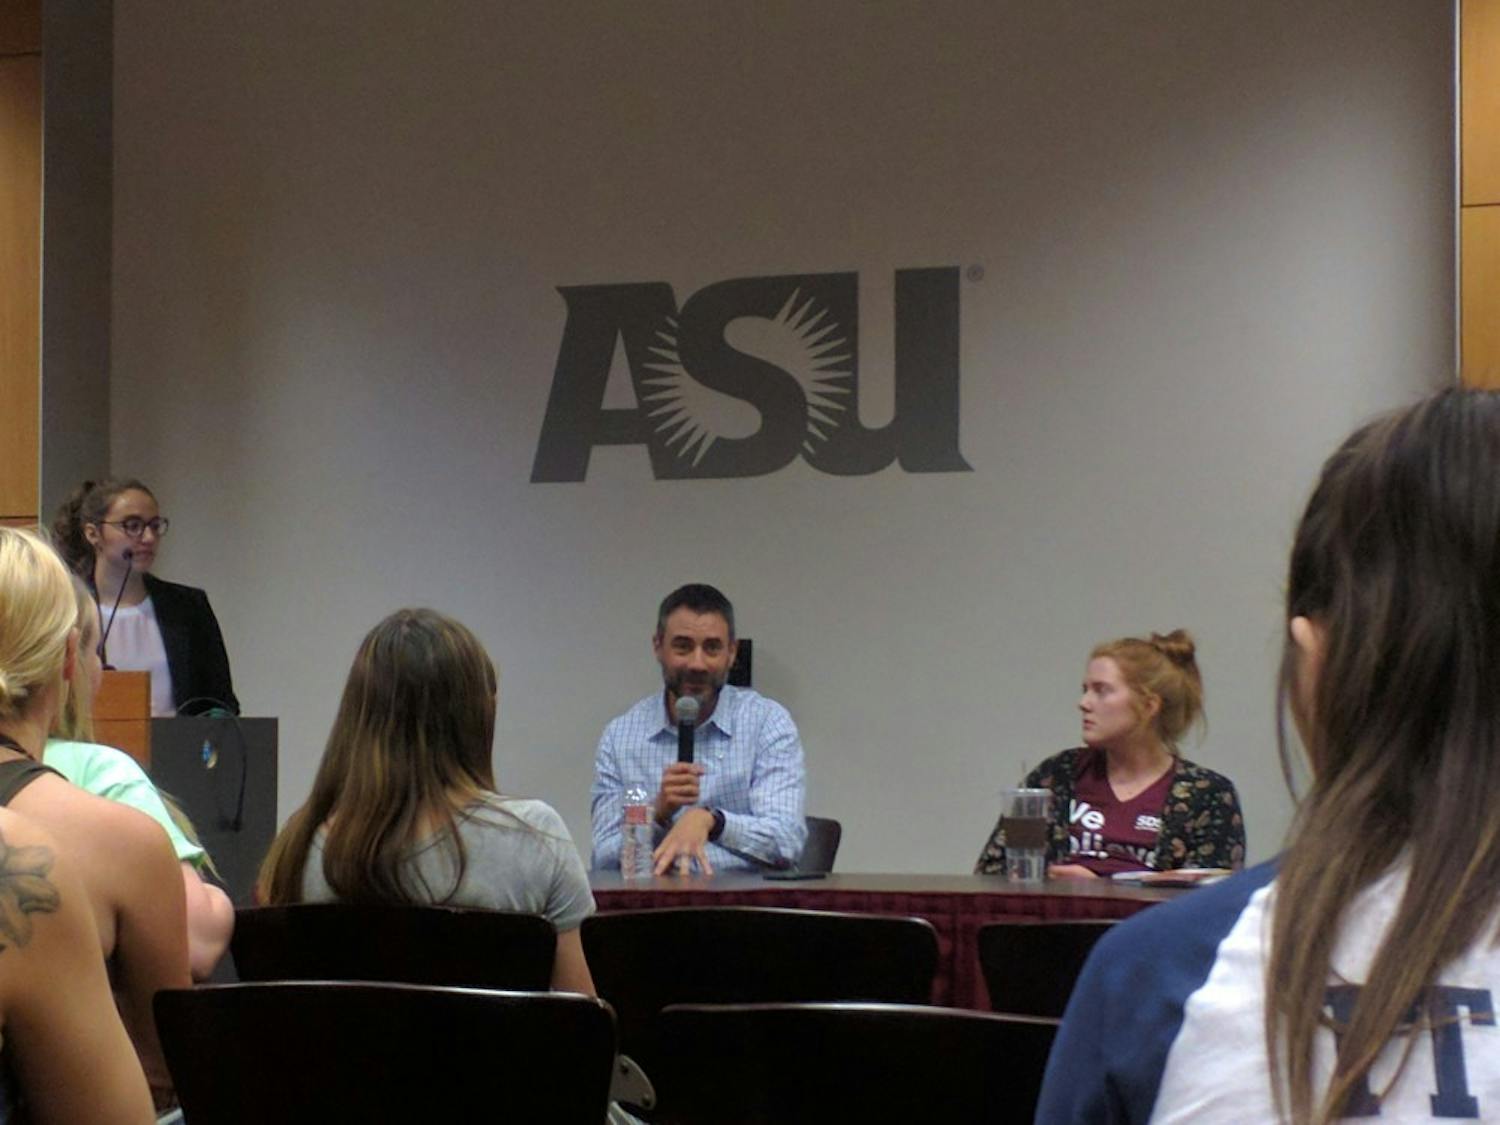 Associate Vice President and Director of ASU Health and Counseling Services Dr. Aaron Krasnow speaks to students at&nbsp;Morning After: How to Provide Support to Sexual Assault Survivors on Wednesday, April 19, 2017